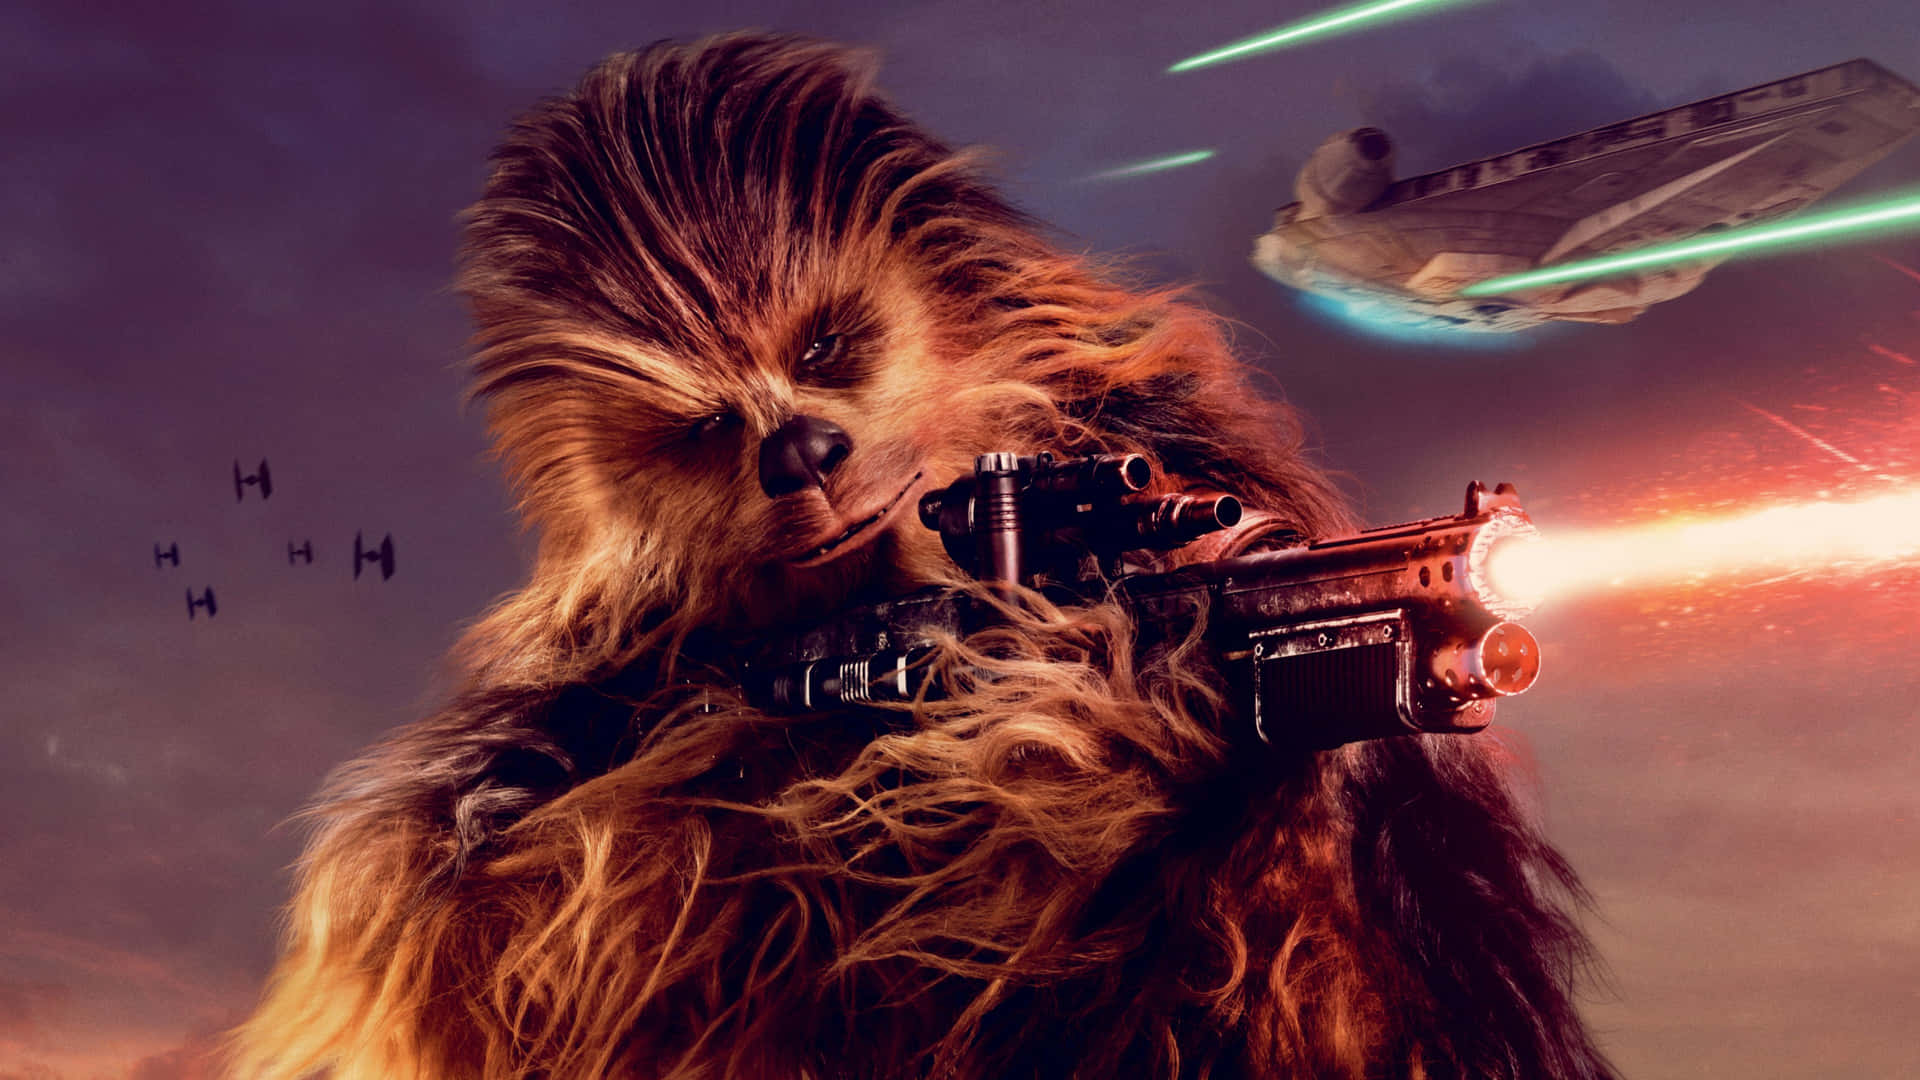 Han Solo and Chewbacca at the helm of the Millennium Falcon in Solo: A Star Wars Story Wallpaper